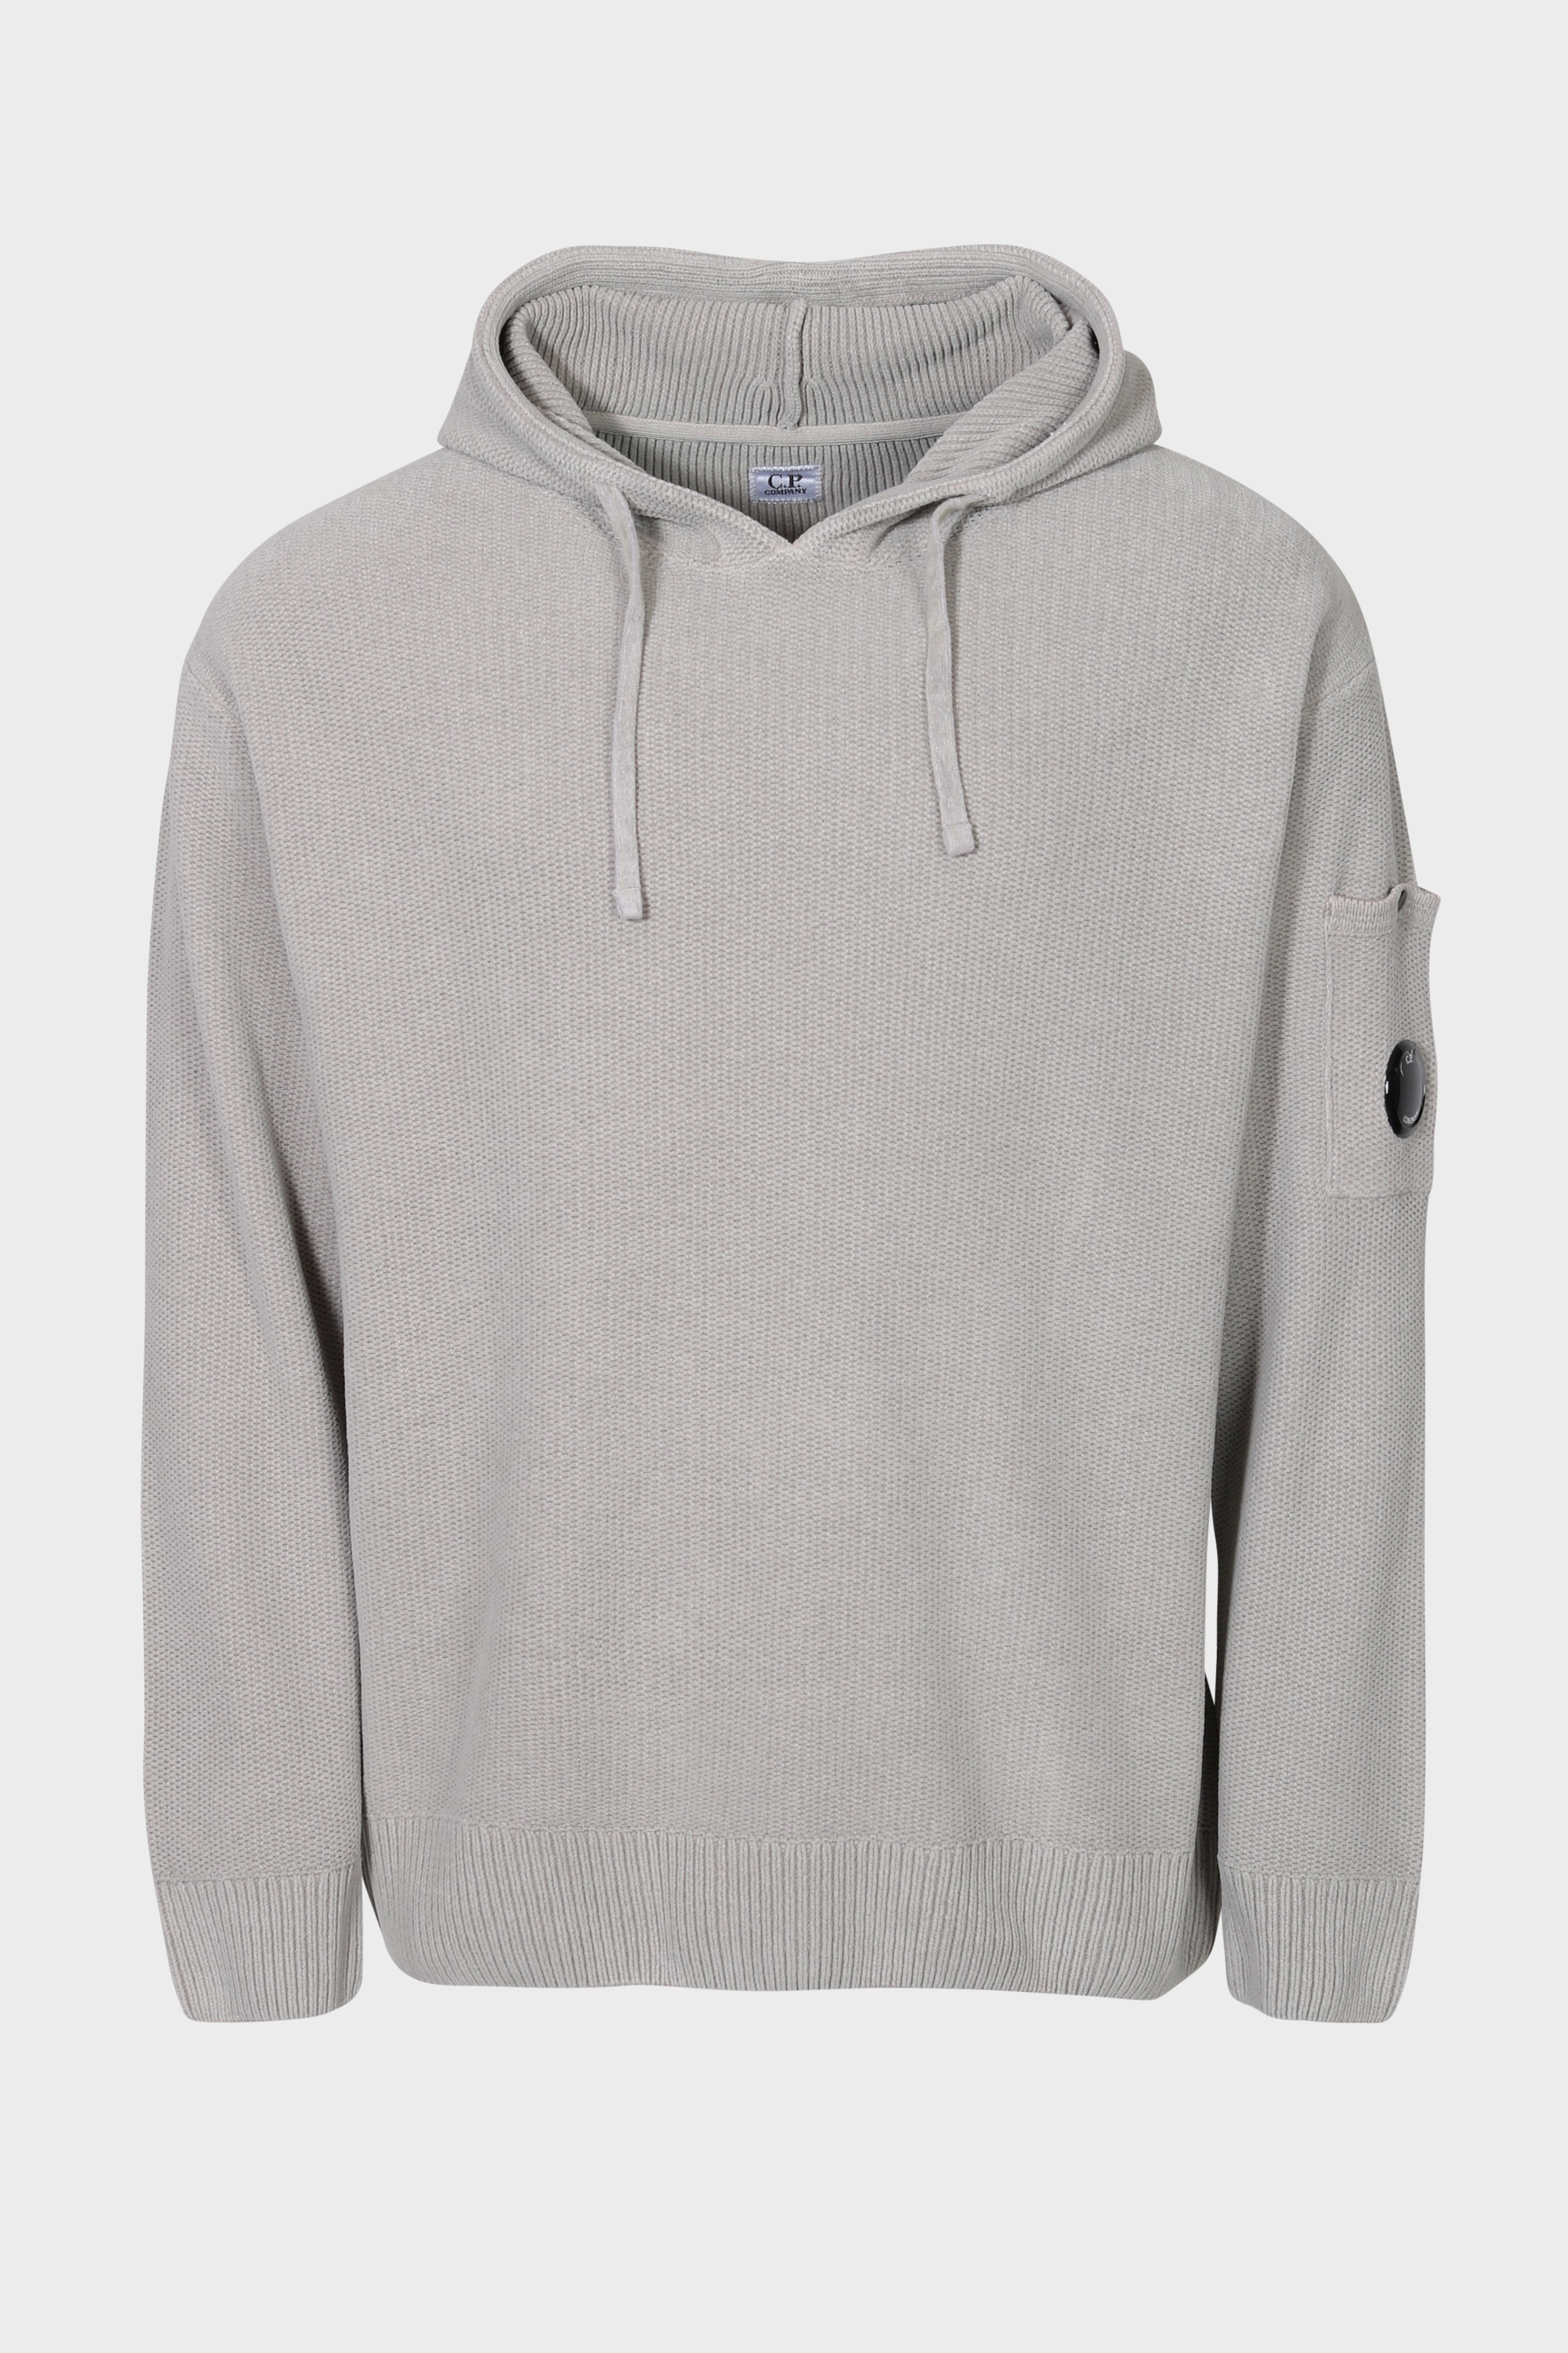 C.P. COMPANY Soft Knit Hoodie in Drizzle Grey 48